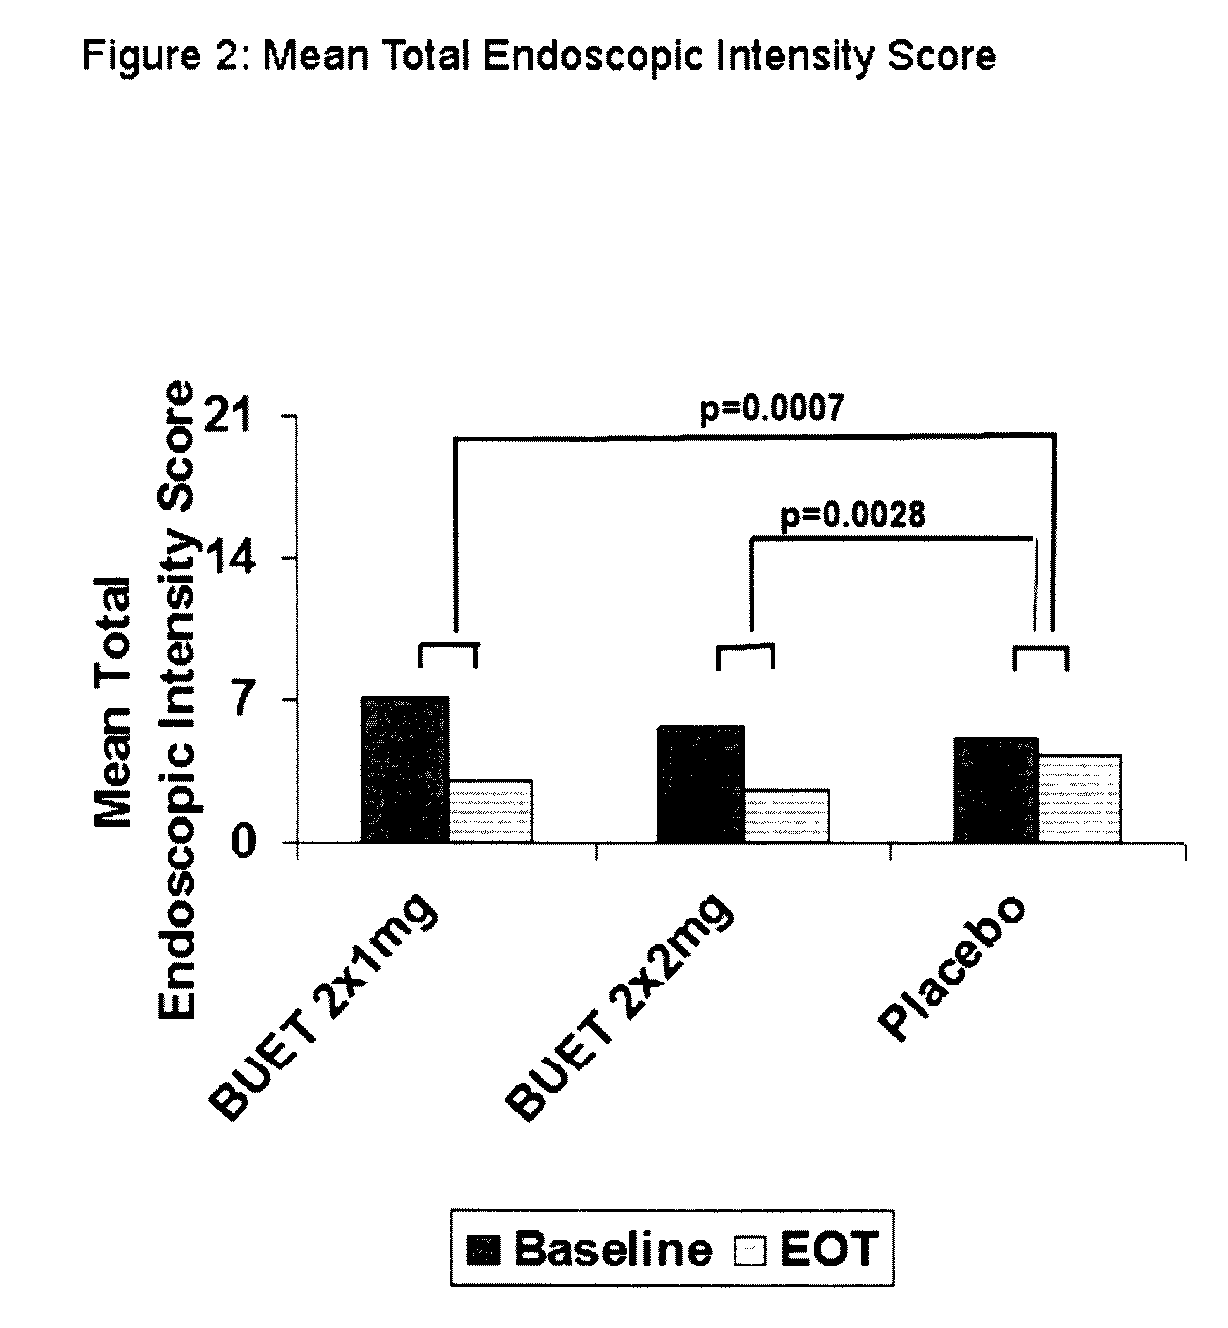 Optimized pharmaceutical formulation for the treatment of inflammatory conditions of the esophagus